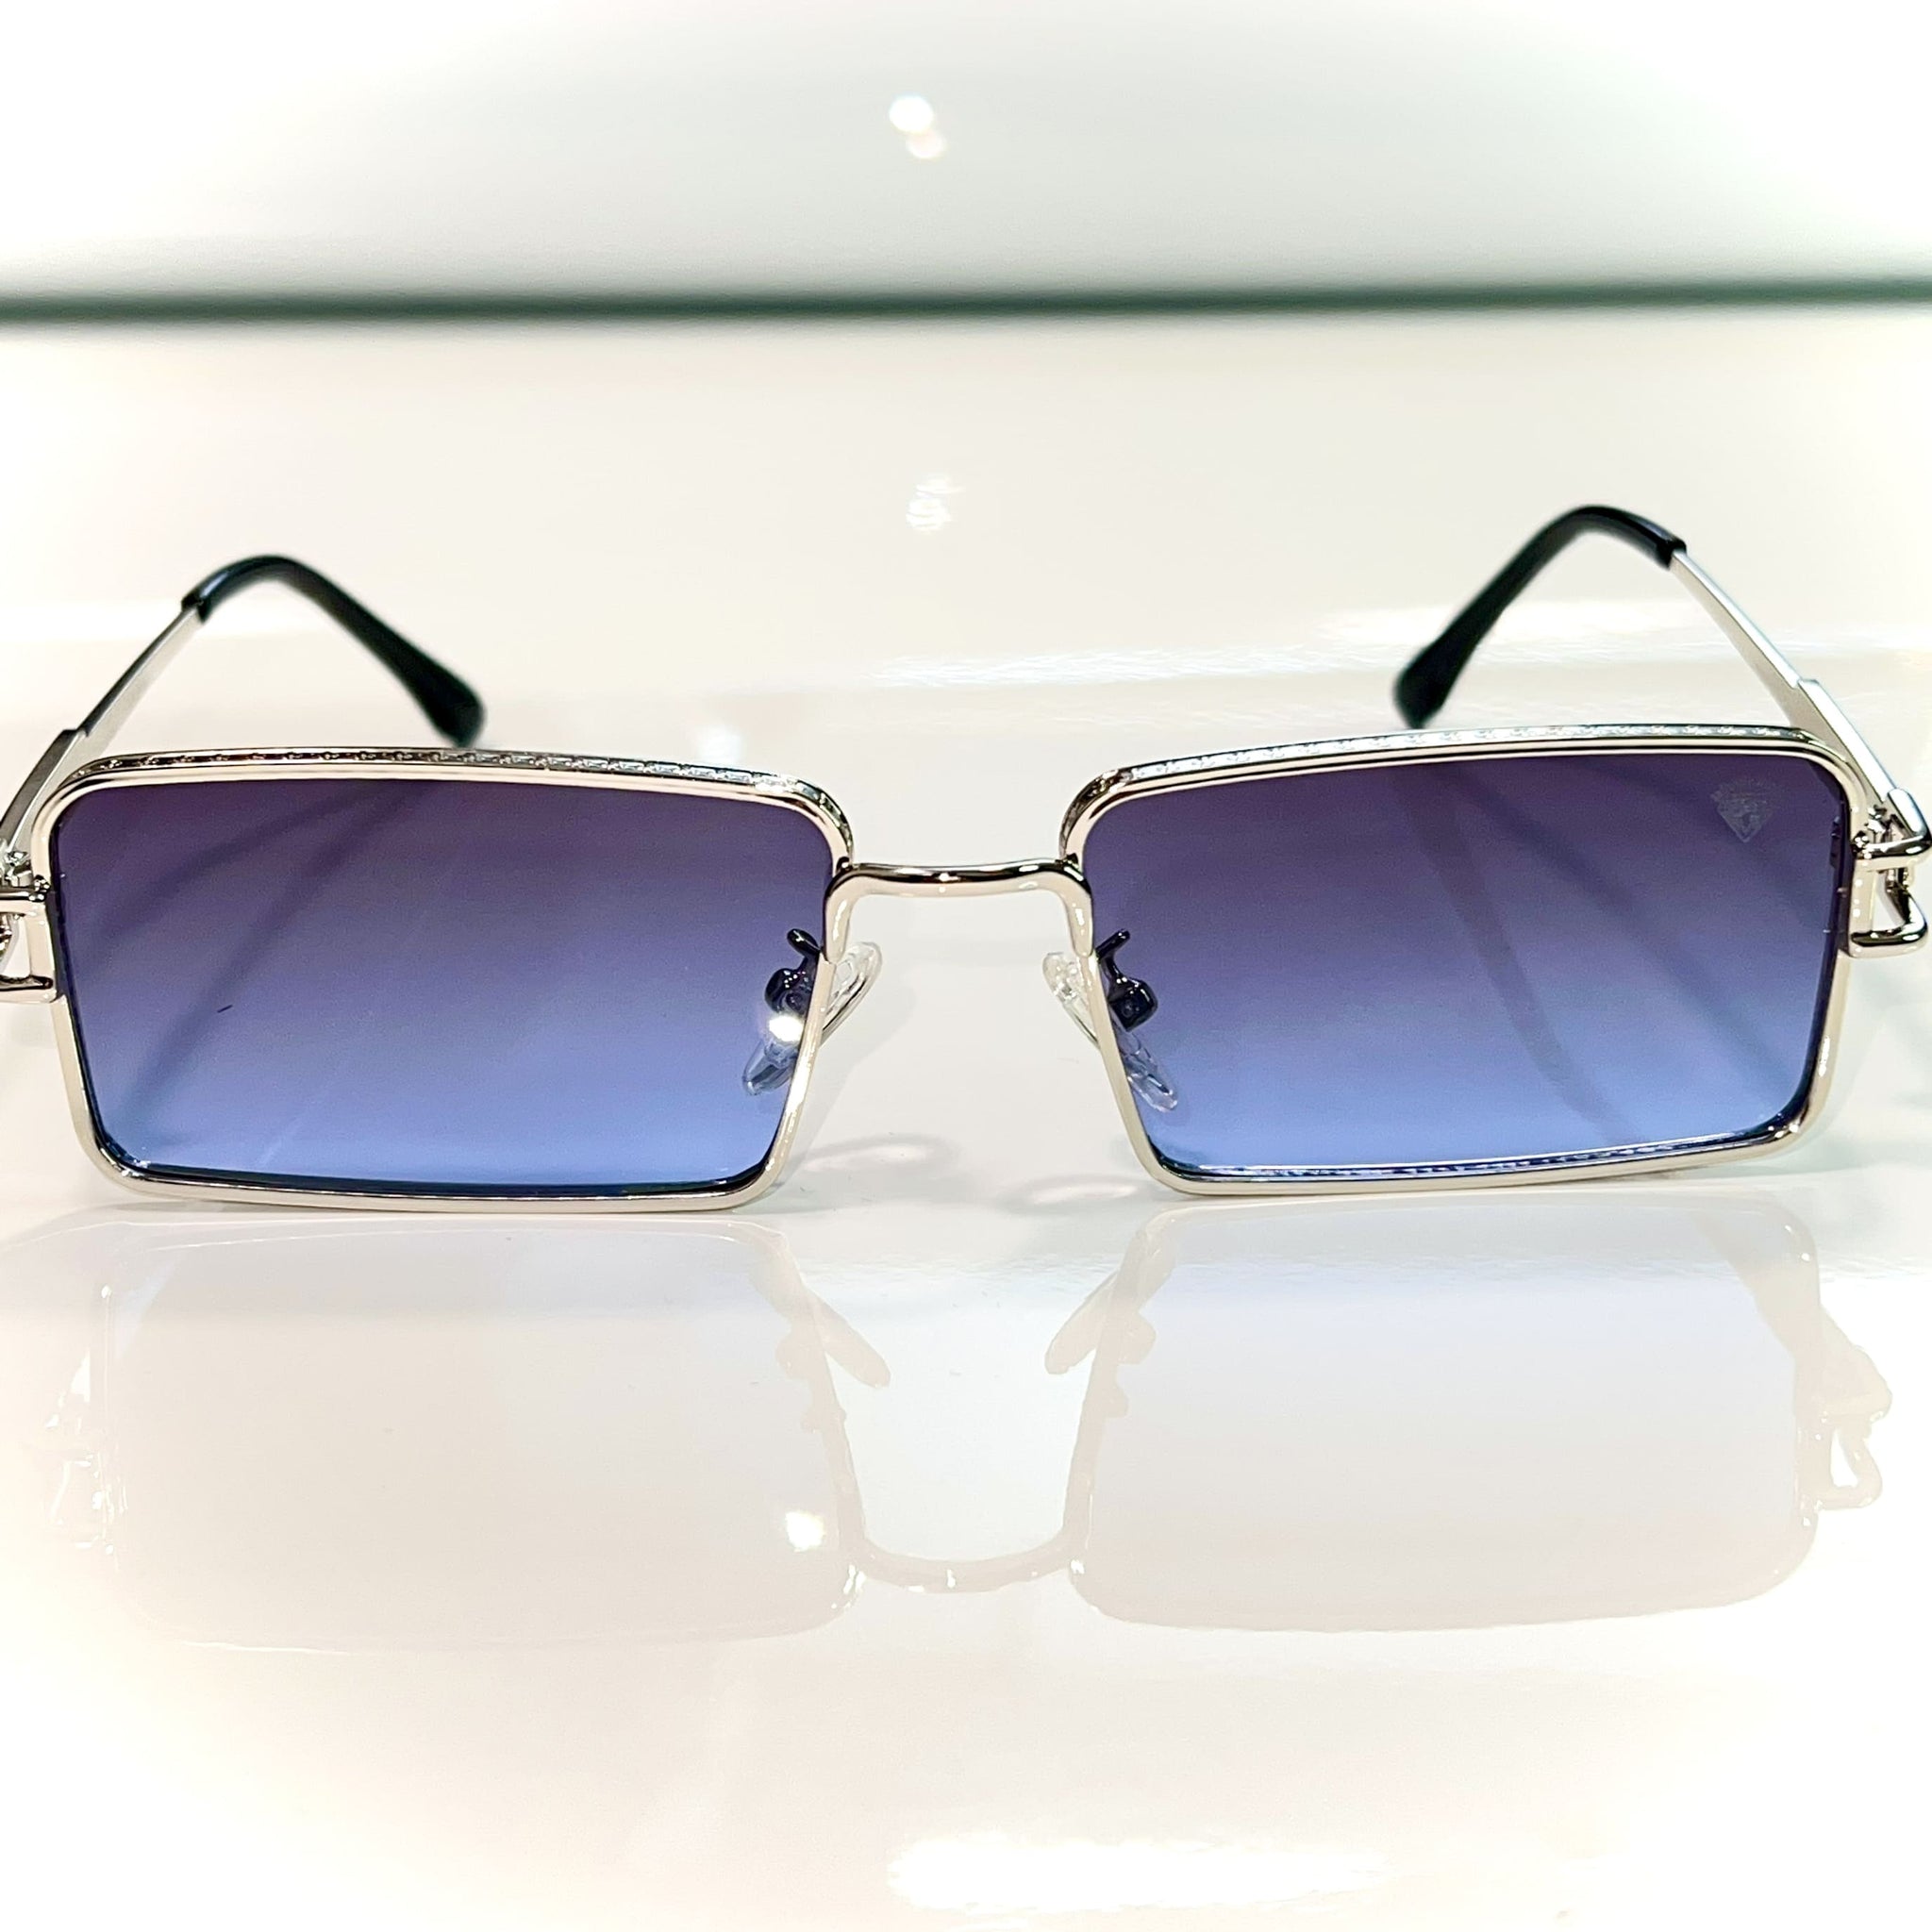 Opulent Glasses - Silver 925 plated - Dark Blue Shade - Sehgal Glasses